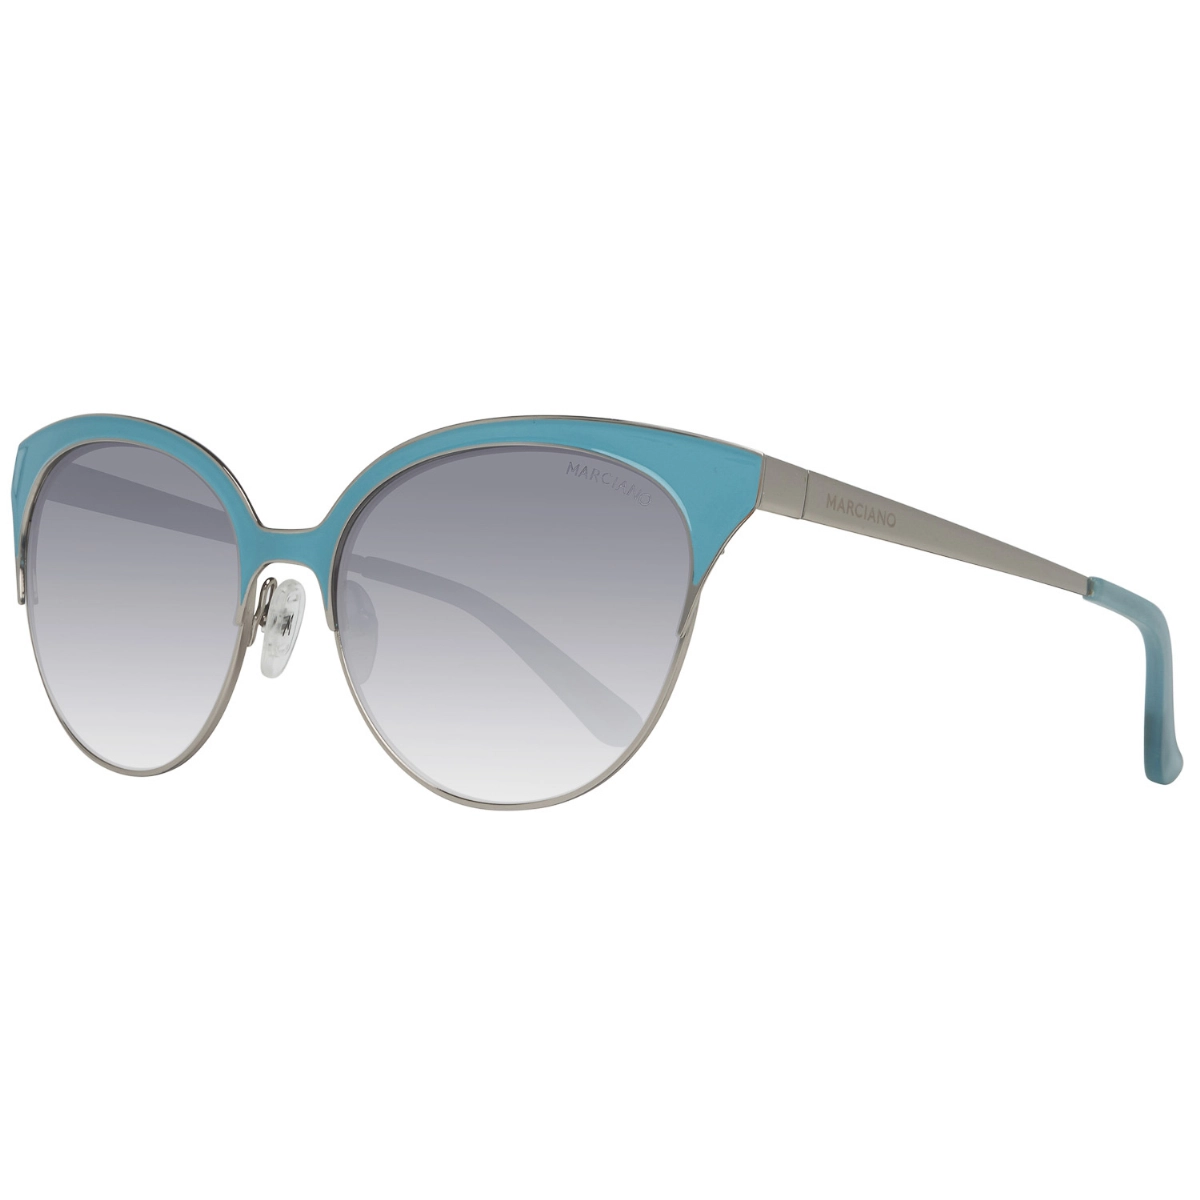 LUNETTES FEMMES GUESS MARCIANO GM0751-5684C